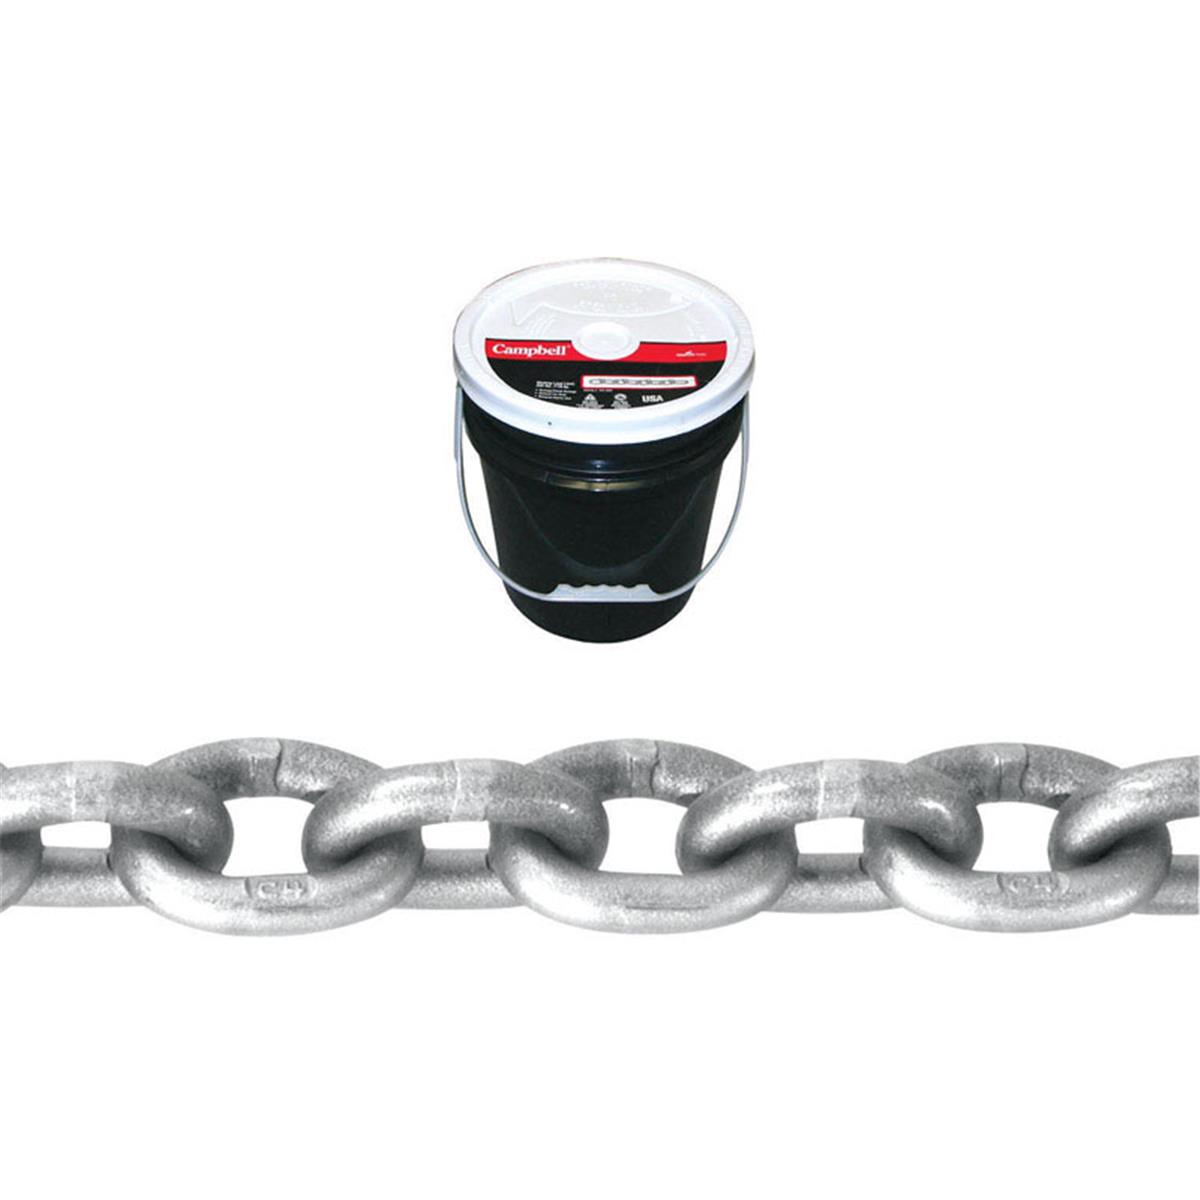 Picture of Apex Tool Group 181613 0.4 in. x 75 ft. Chain High test, Bright